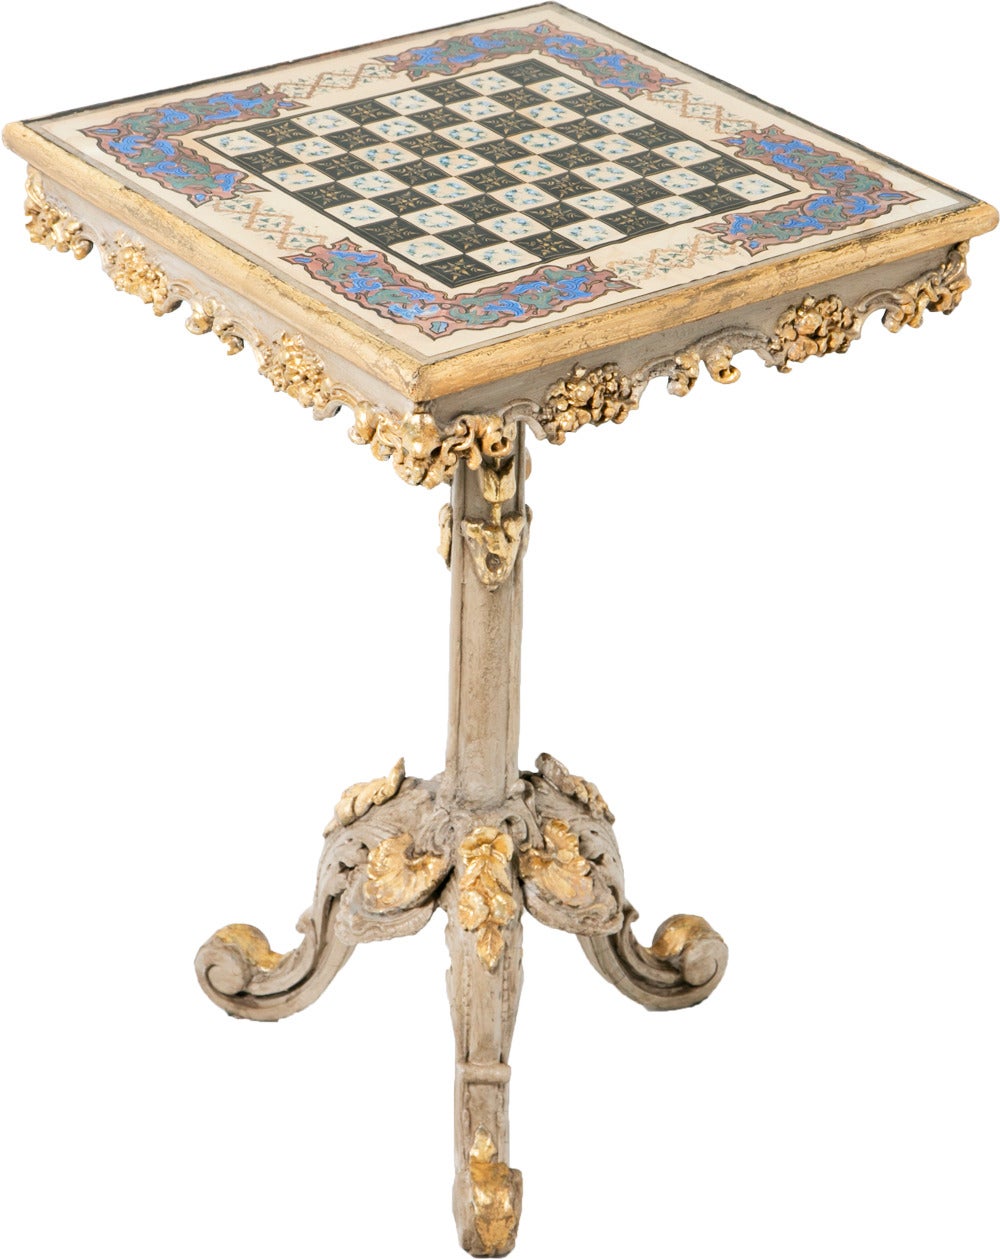 A 19th Century Italian Painted and Gilt Game Table